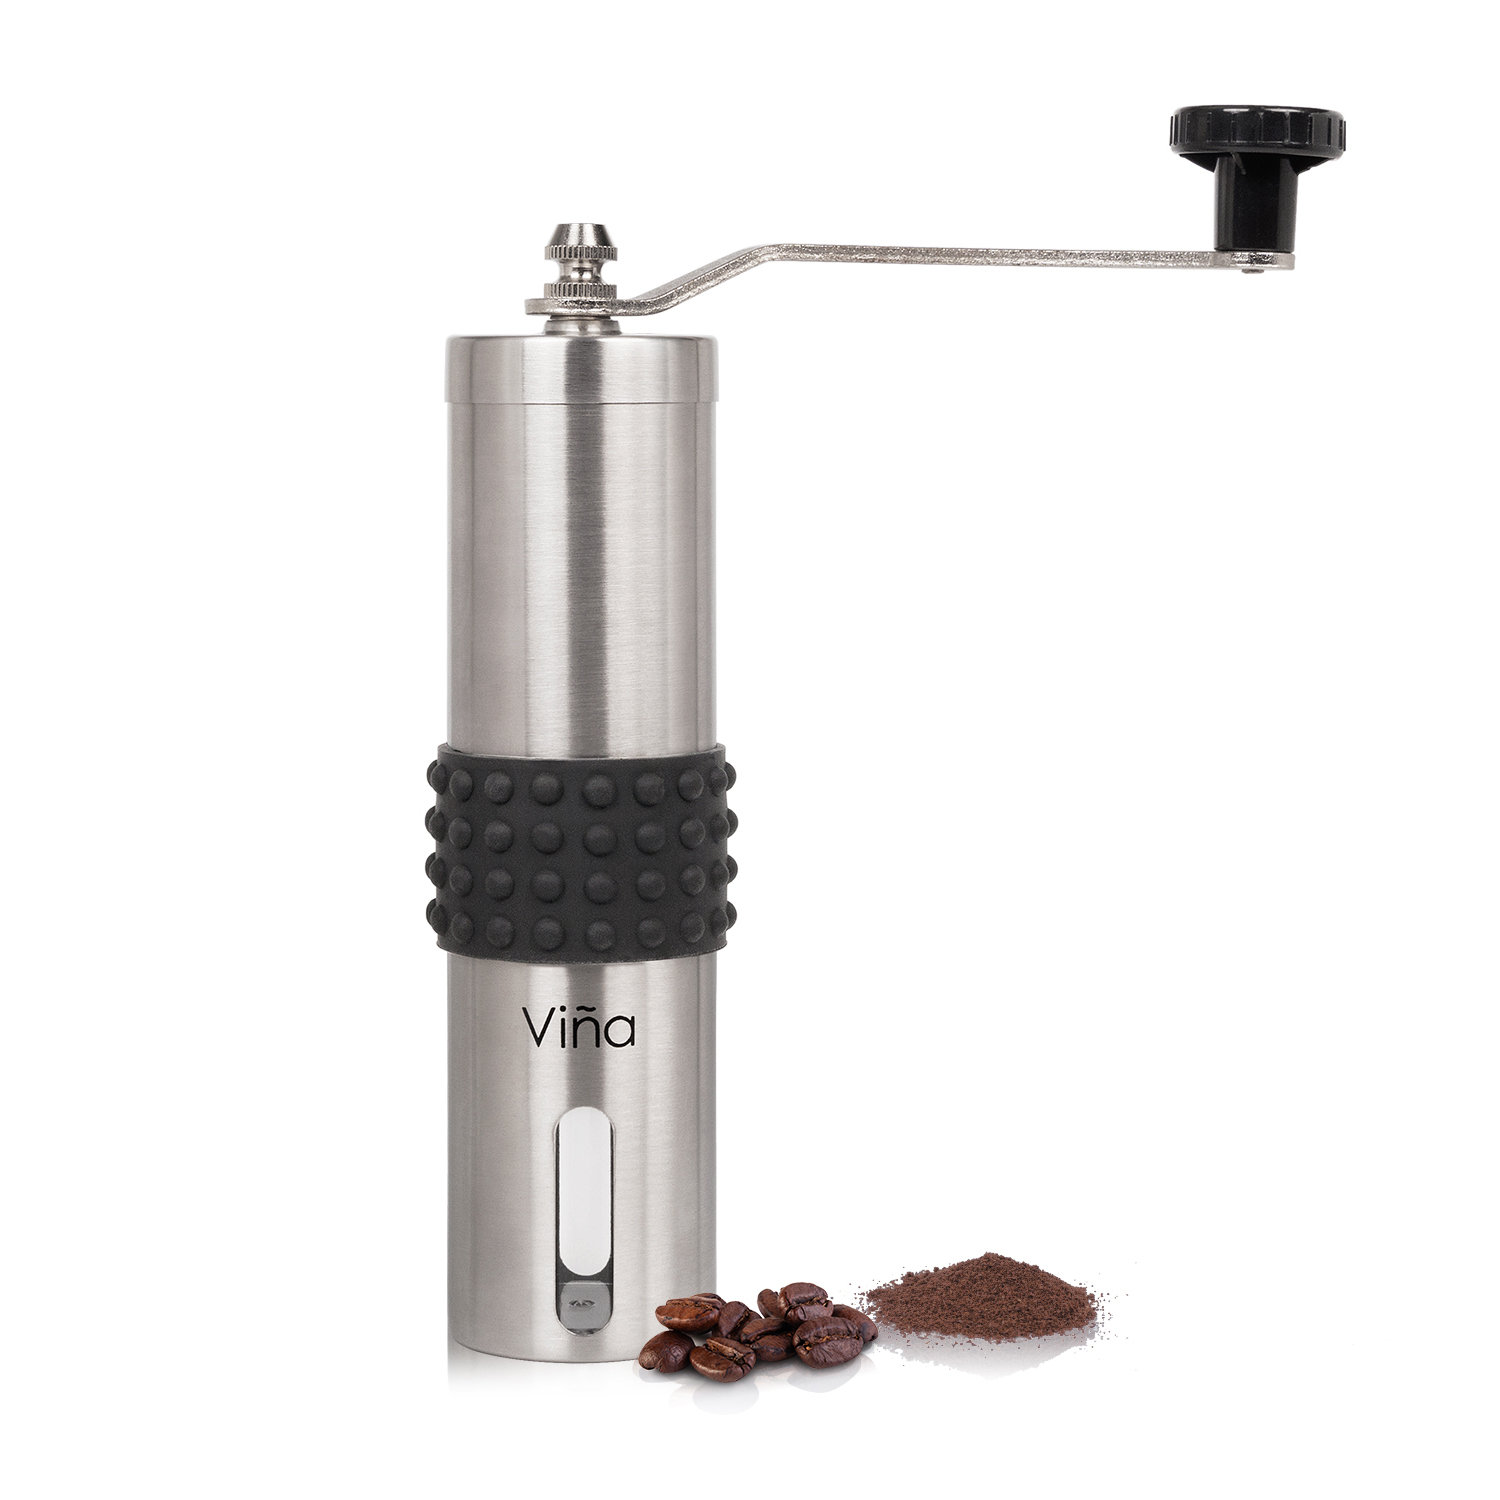 Mr. Coffee Automatic Burr Mill Grinder, Stainless Steel/Black